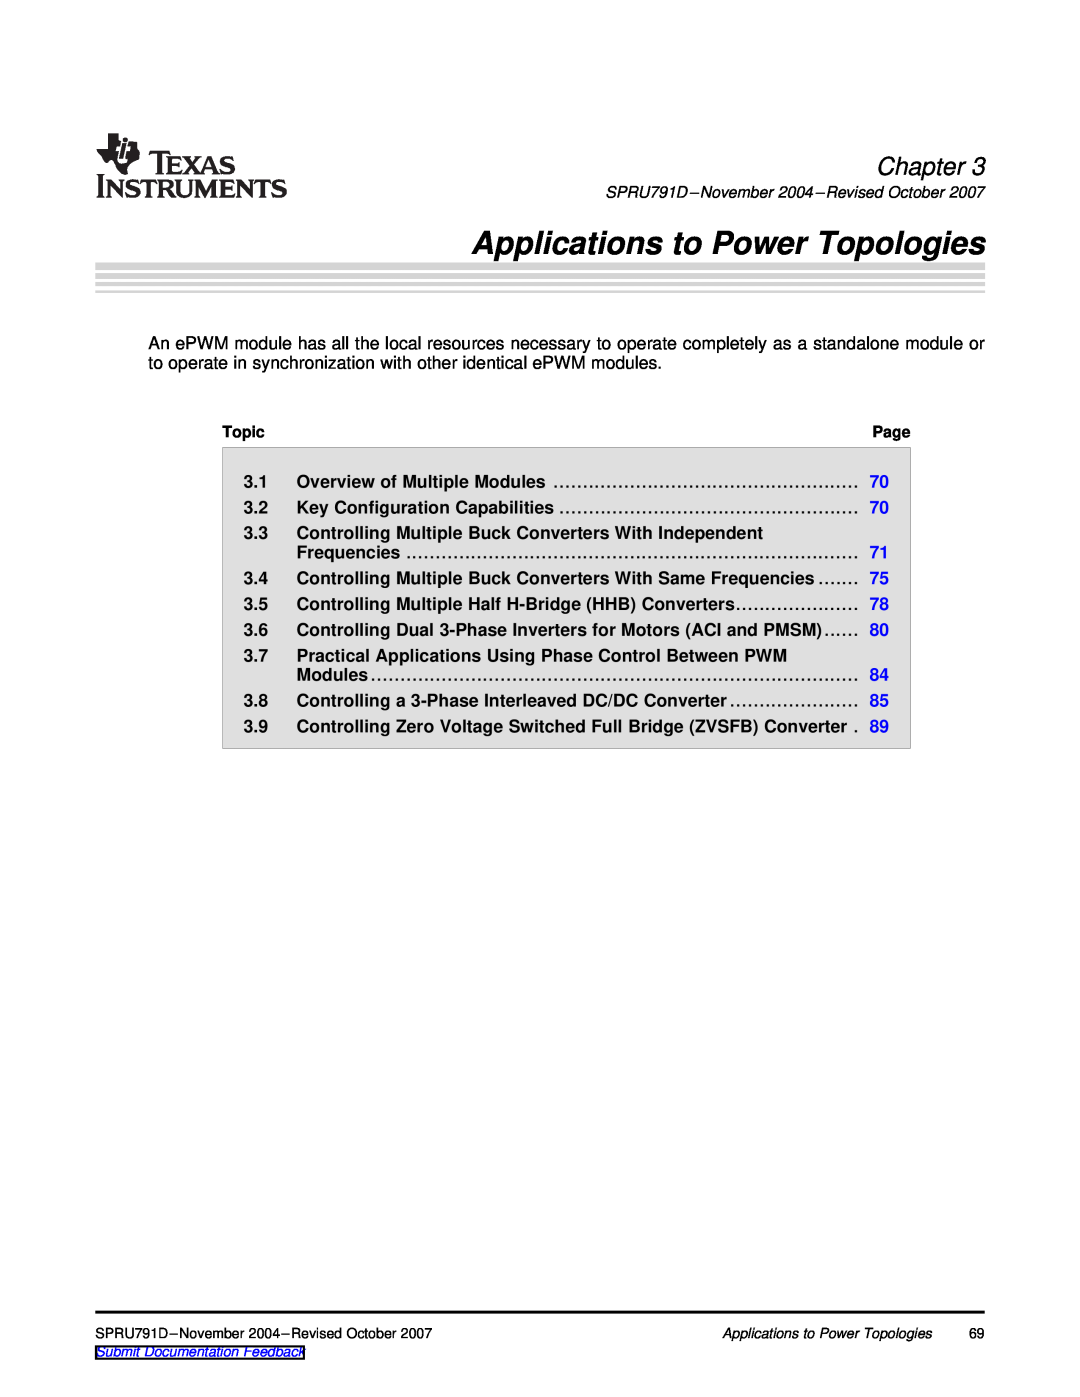 Texas Instruments 28xxx Applications to Power Topologies, Overview of Multiple Modules, Key Configuration Capabilities 